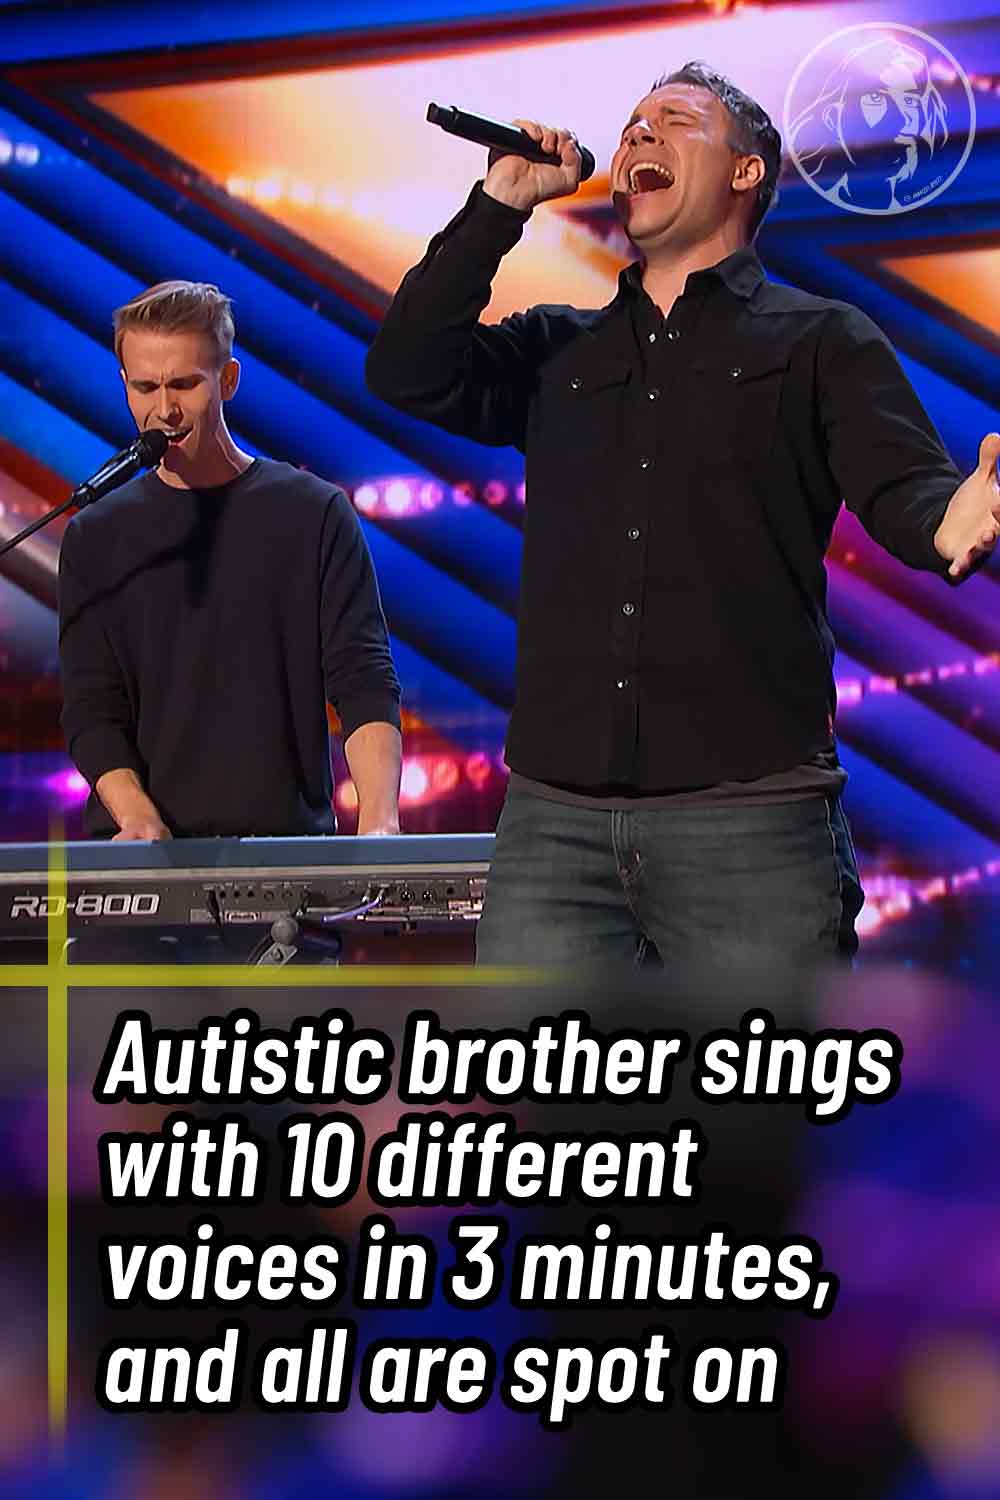 Autistic brother sings with 10 different voices in 3 minutes, and all are spot on